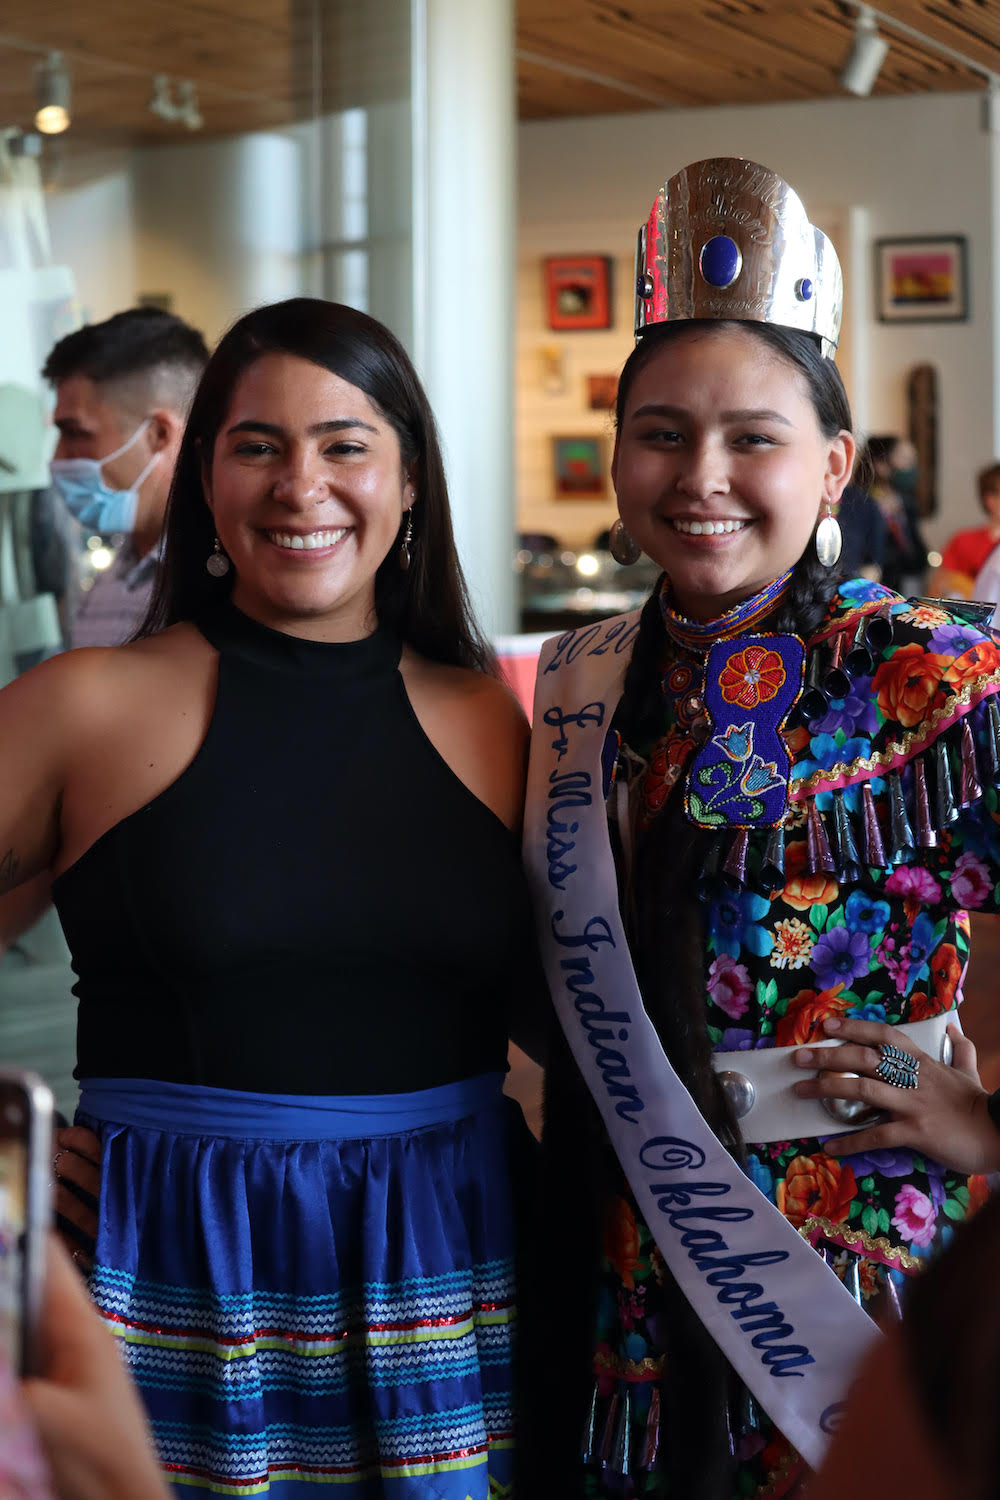 Cheyenne Kippenberger (Seminole Tribe of Florida), former Miss Indian World, attended the grand opening of the First Americans Museum in Oklahoma City on Saturday, September 19, 2021. (Photo/Darren Thompson for Native News Online)